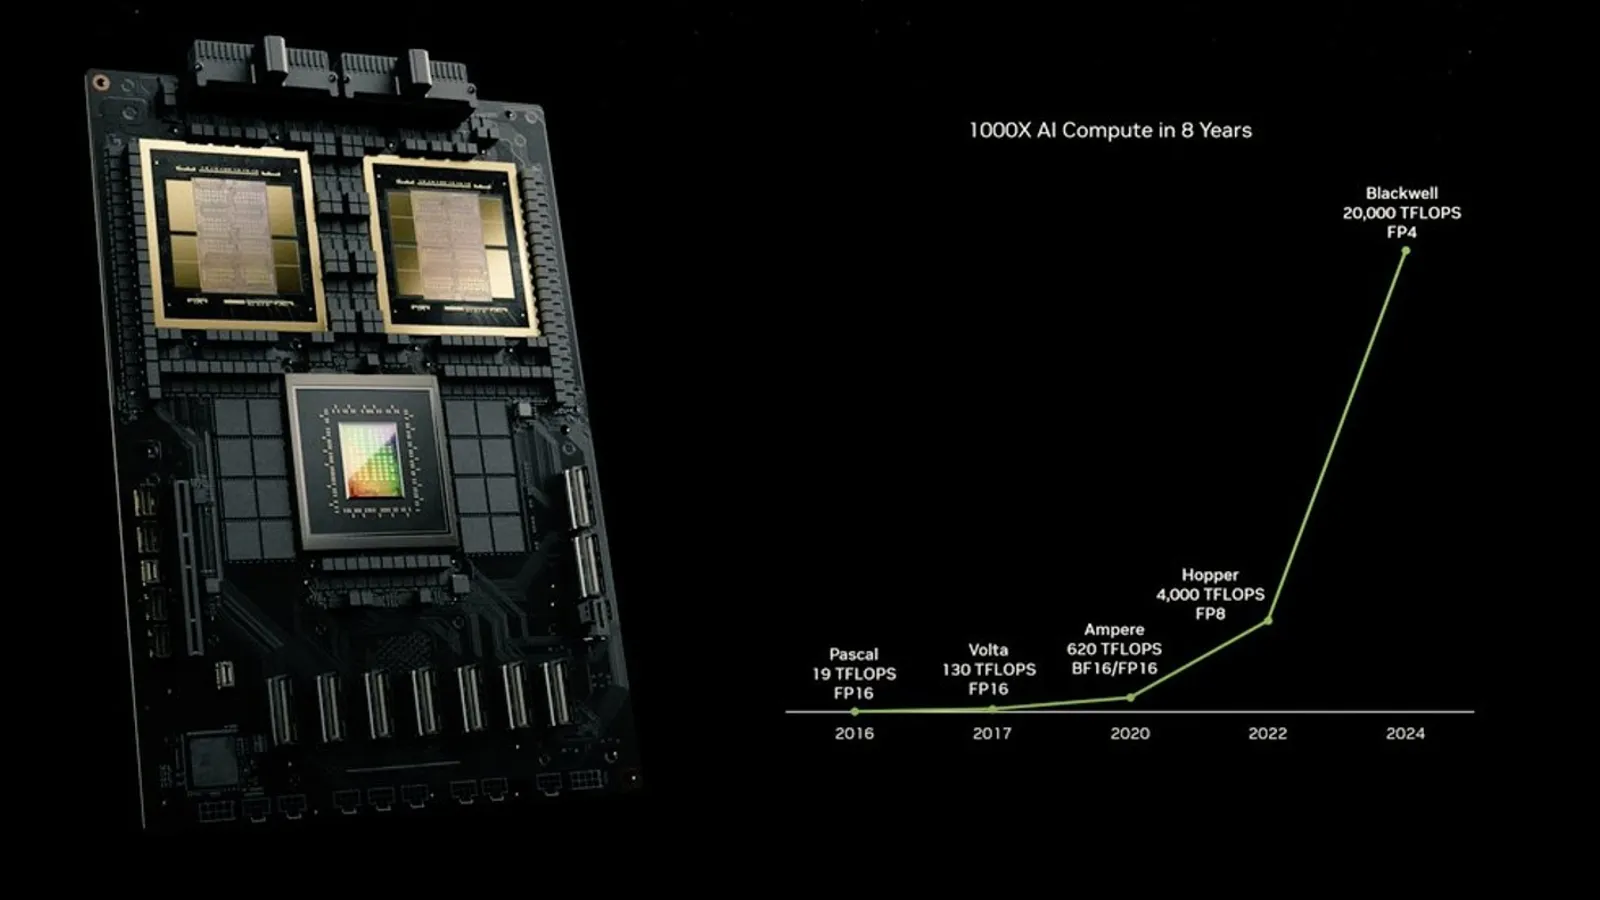 NVIDIA’s Blackwell AI chip to cost between $30,000 to $40,000 | Technology News